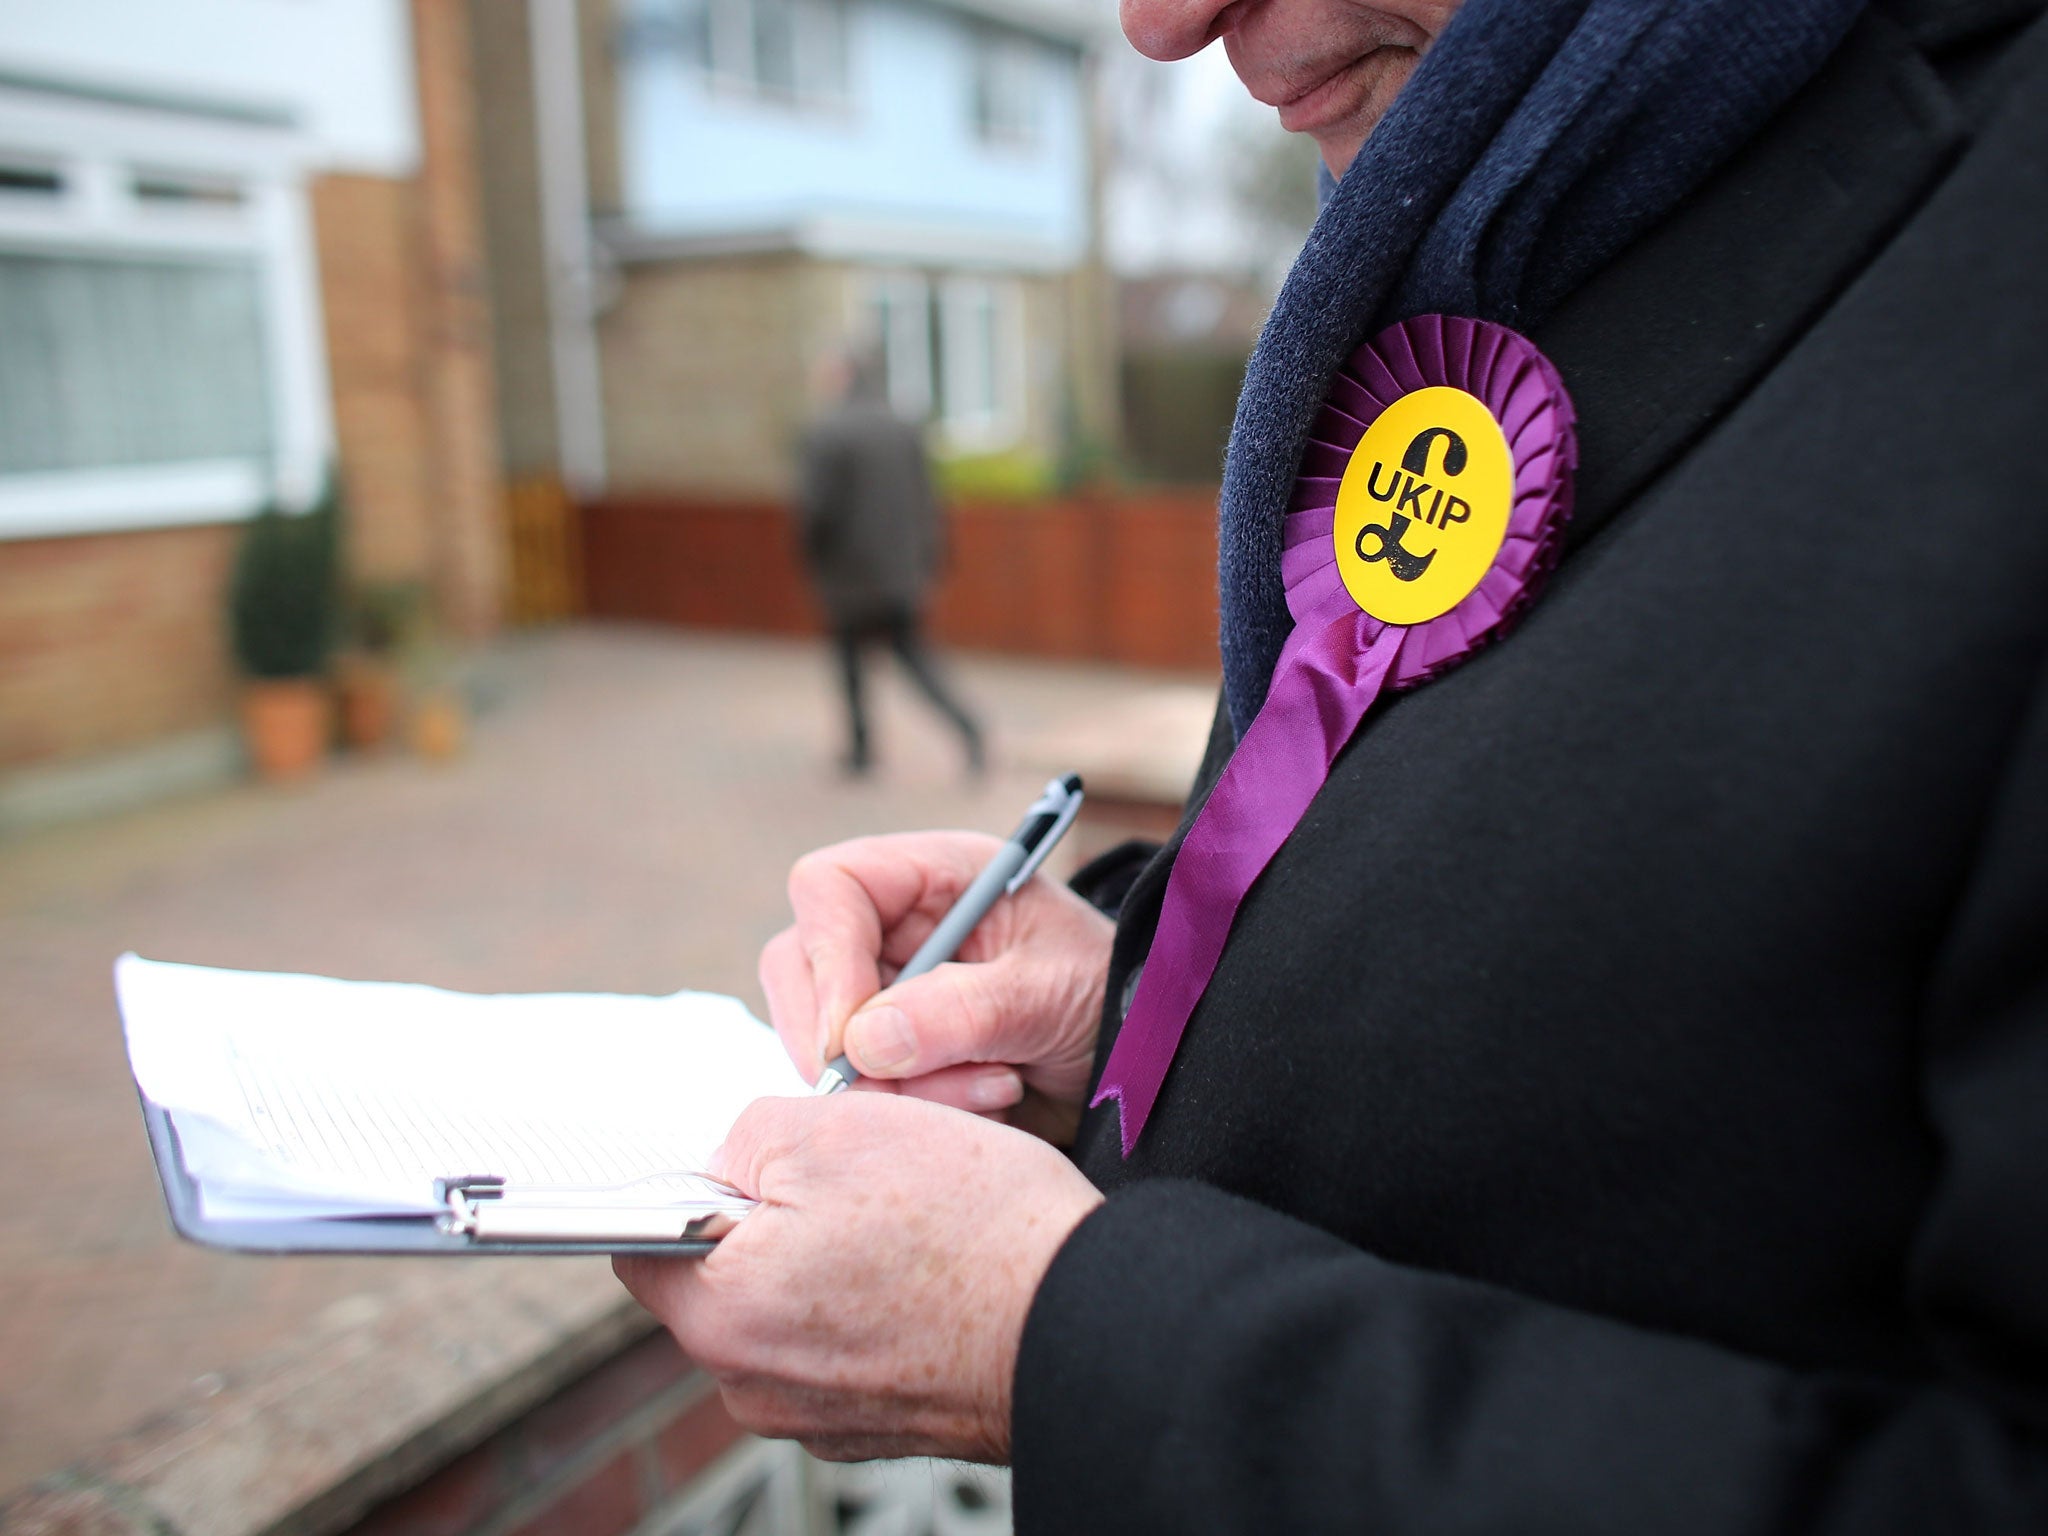 Ukip campaigner in Eastleigh, where the Tories came third in February